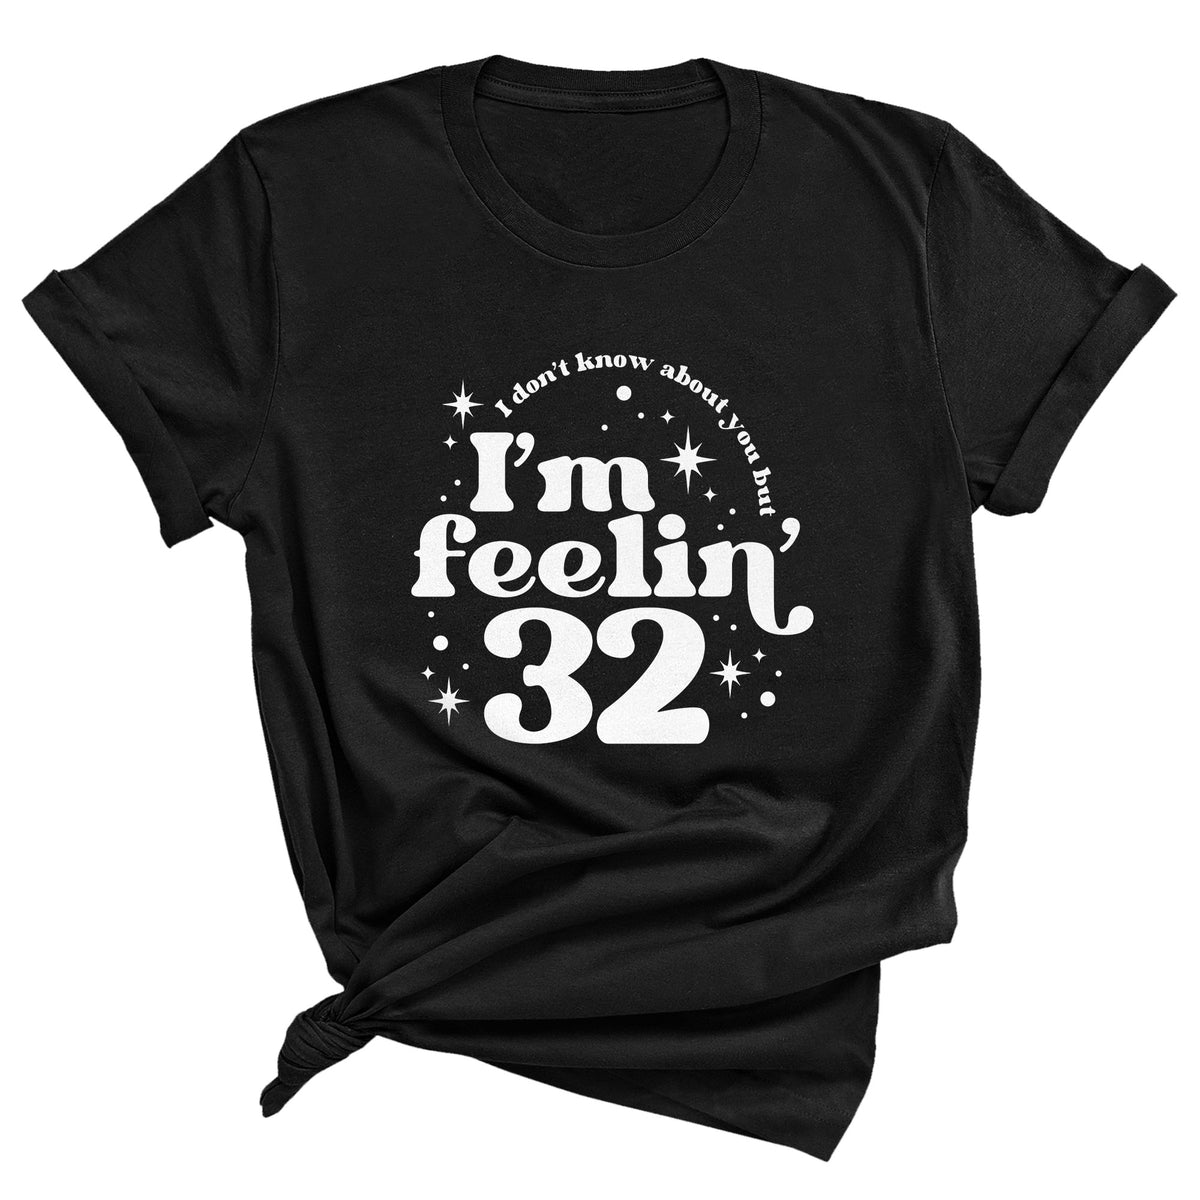 I Don't Know About You, But I'm Feeling Custom Age Unisex T-Shirt